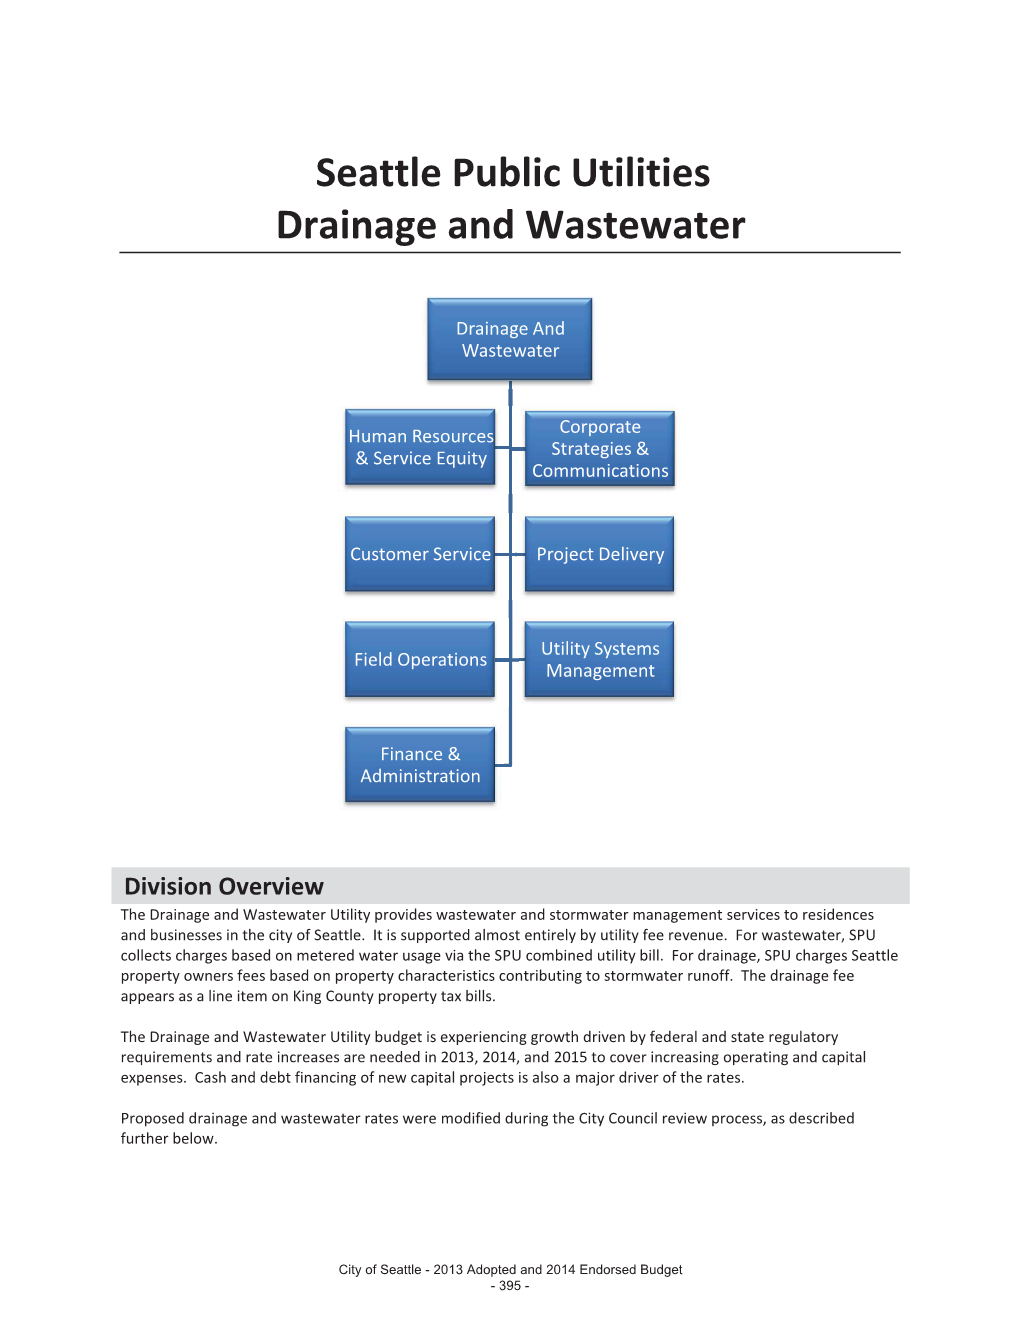 Seattle Public Utilities, Drainage & Wastewater, P.395